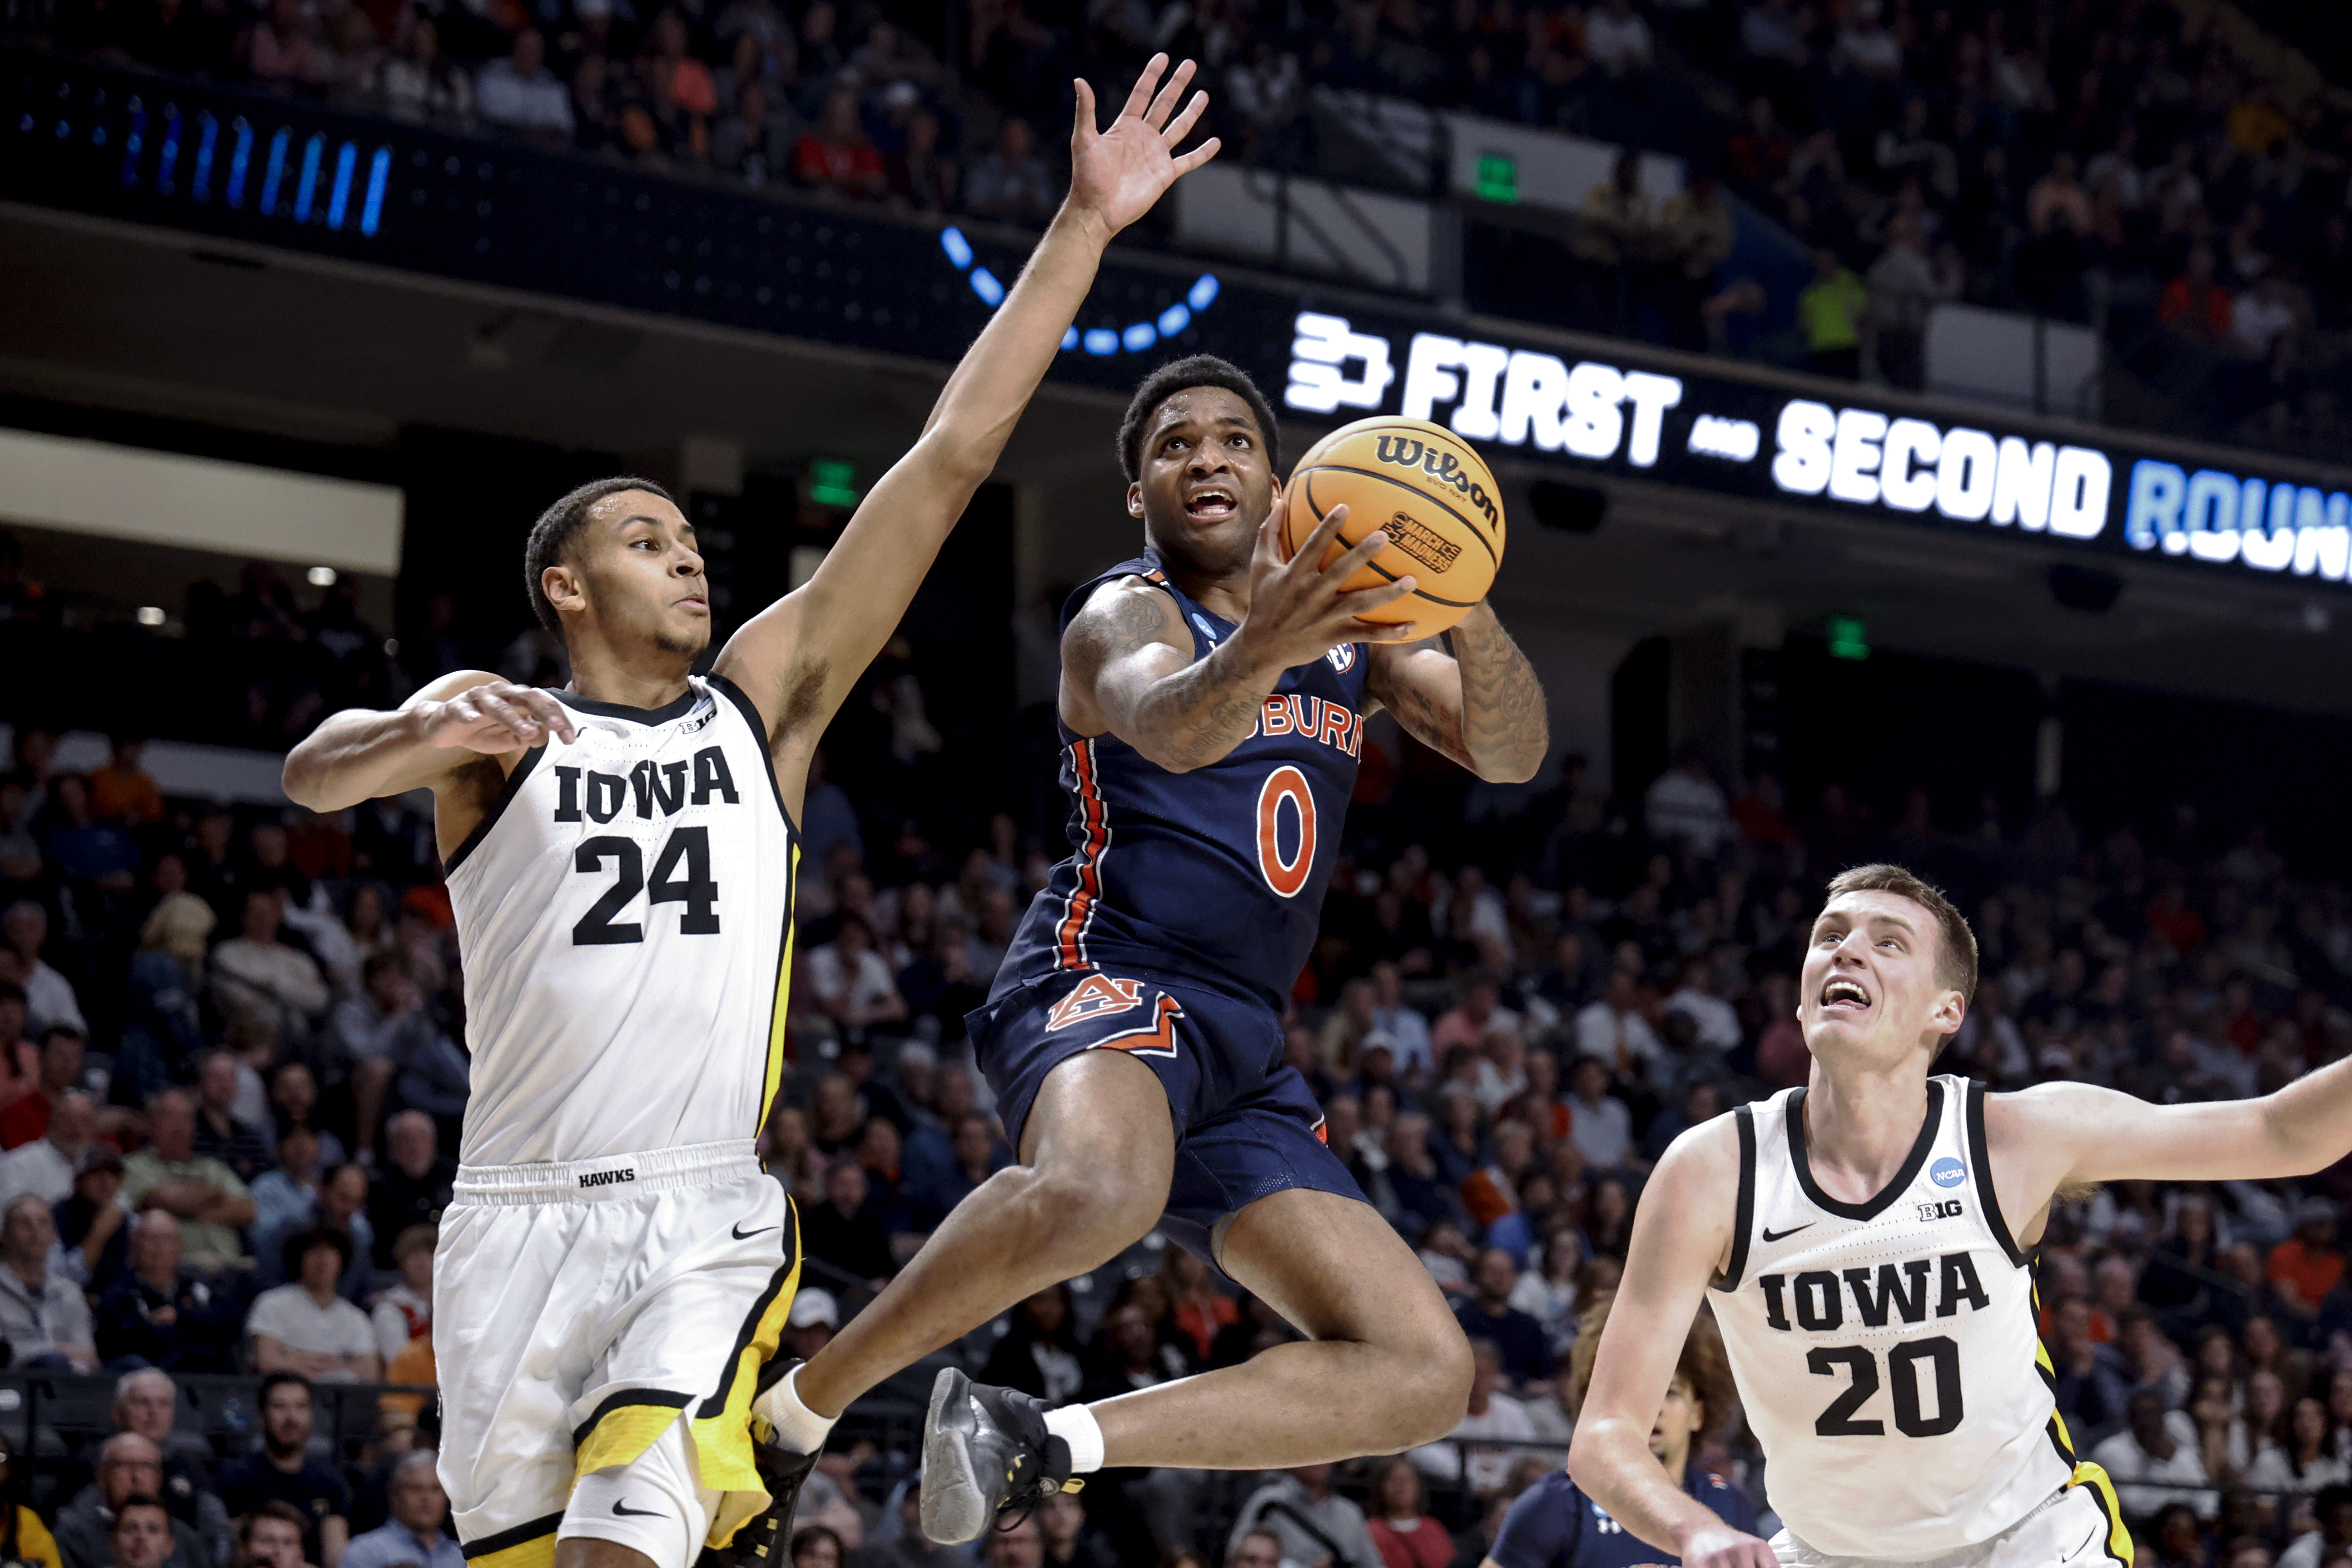 Auburn defeats Iowa and advances to the round of 32